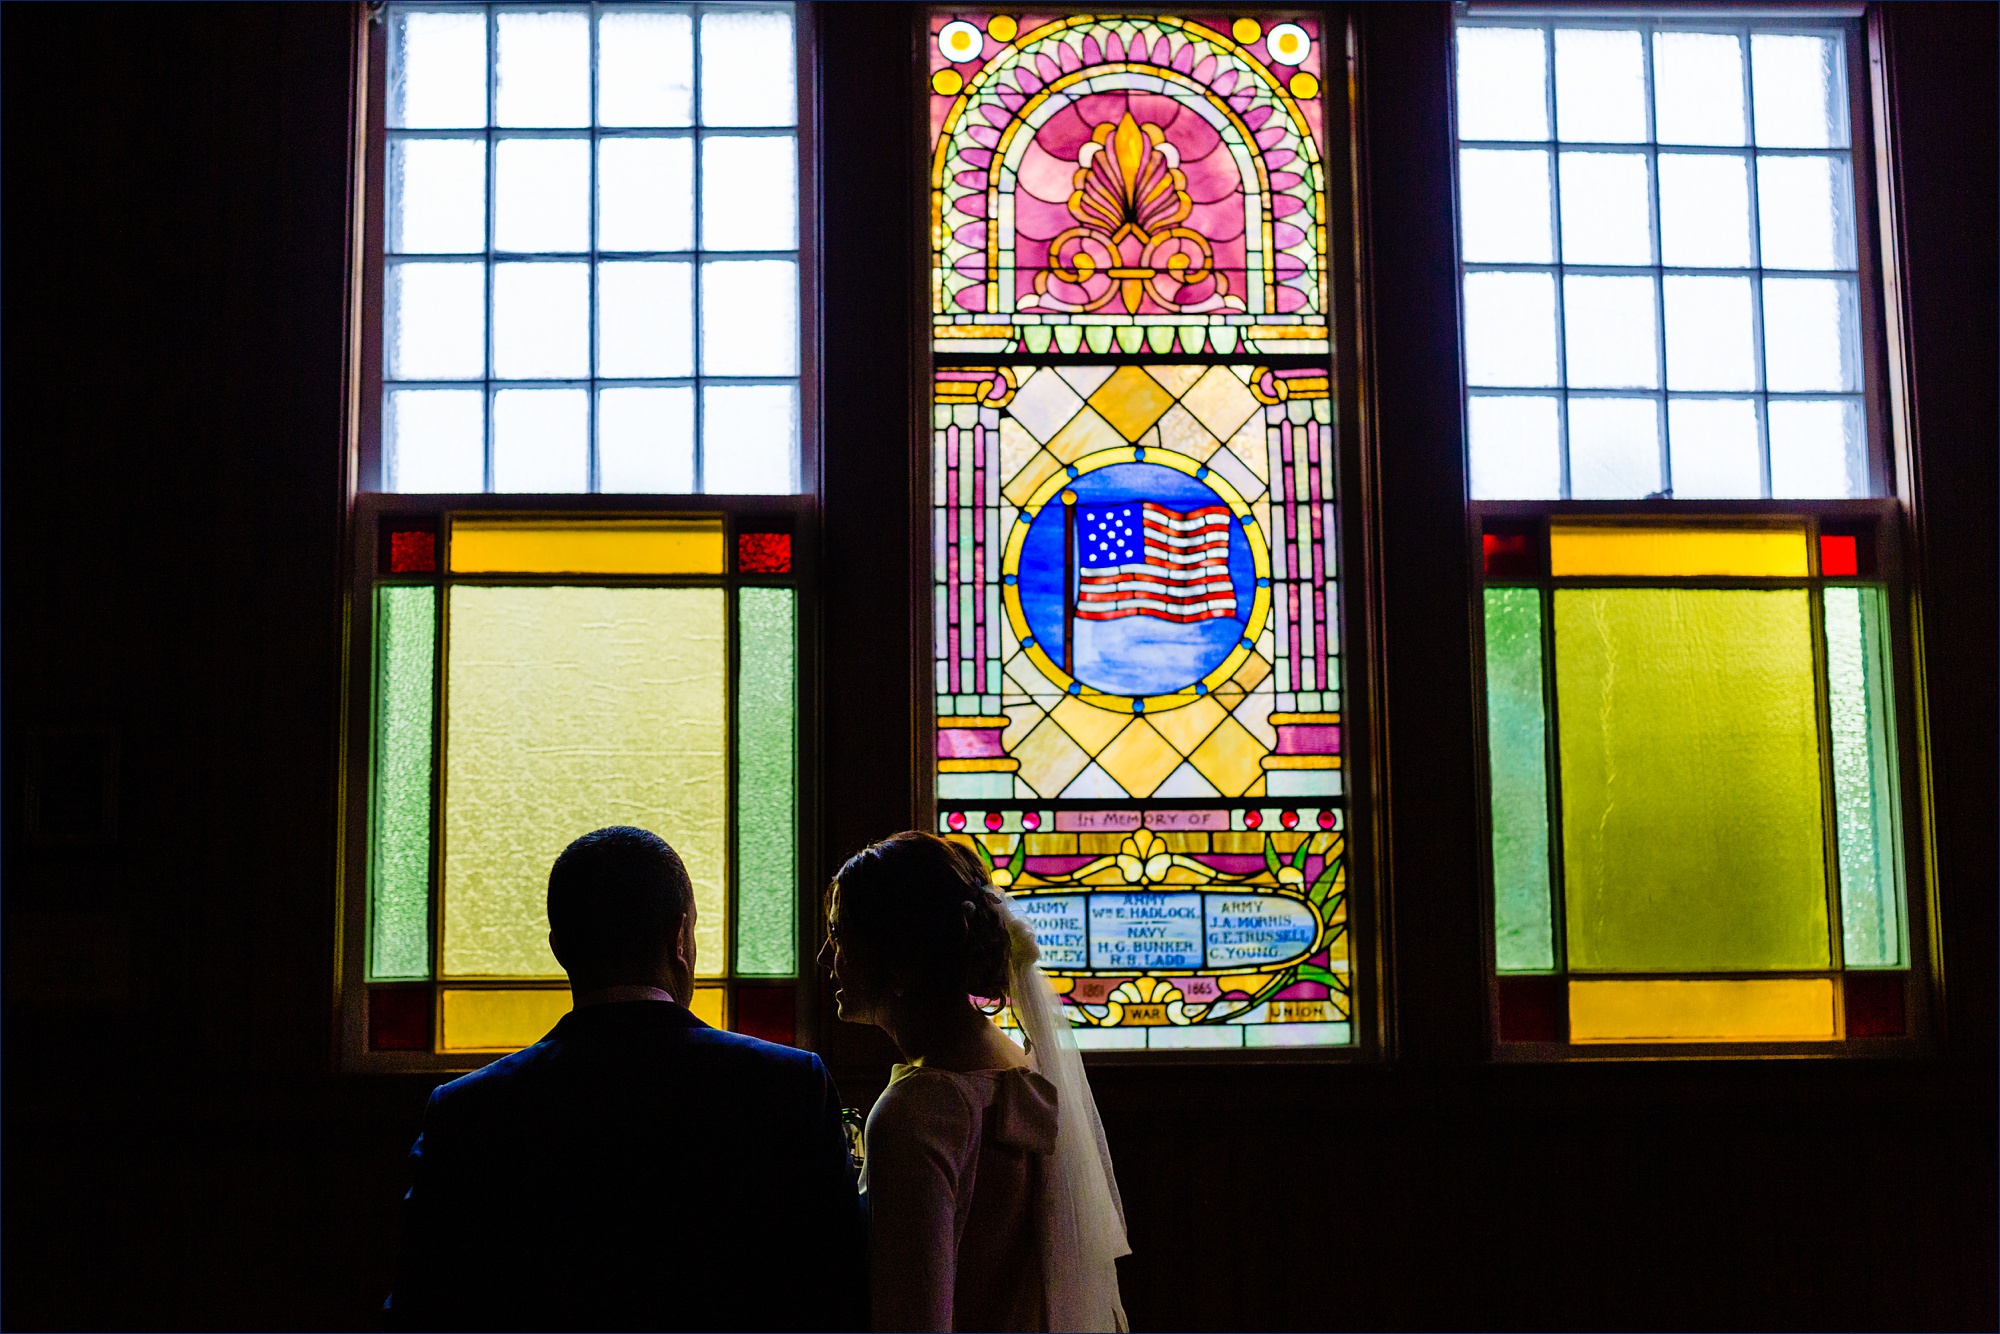 The bride and groom have a moment together in front of the stained glass windows of Islesford Congregational Church